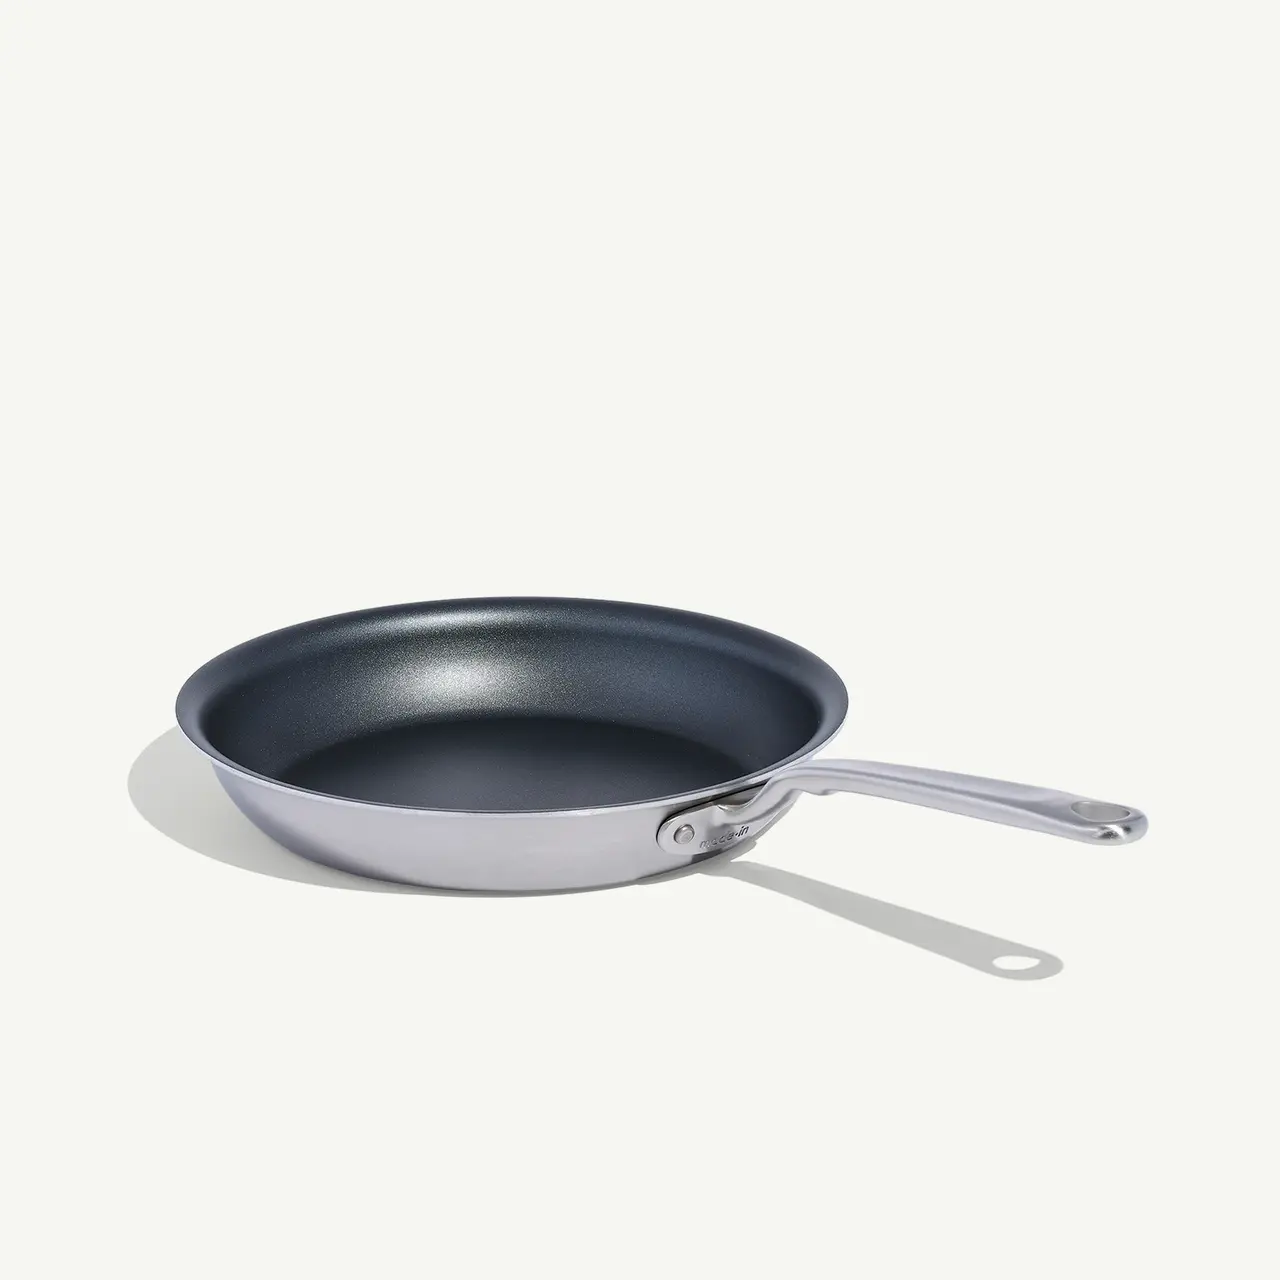 A non-stick frying pan with a stainless steel handle sits isolated on a white background.